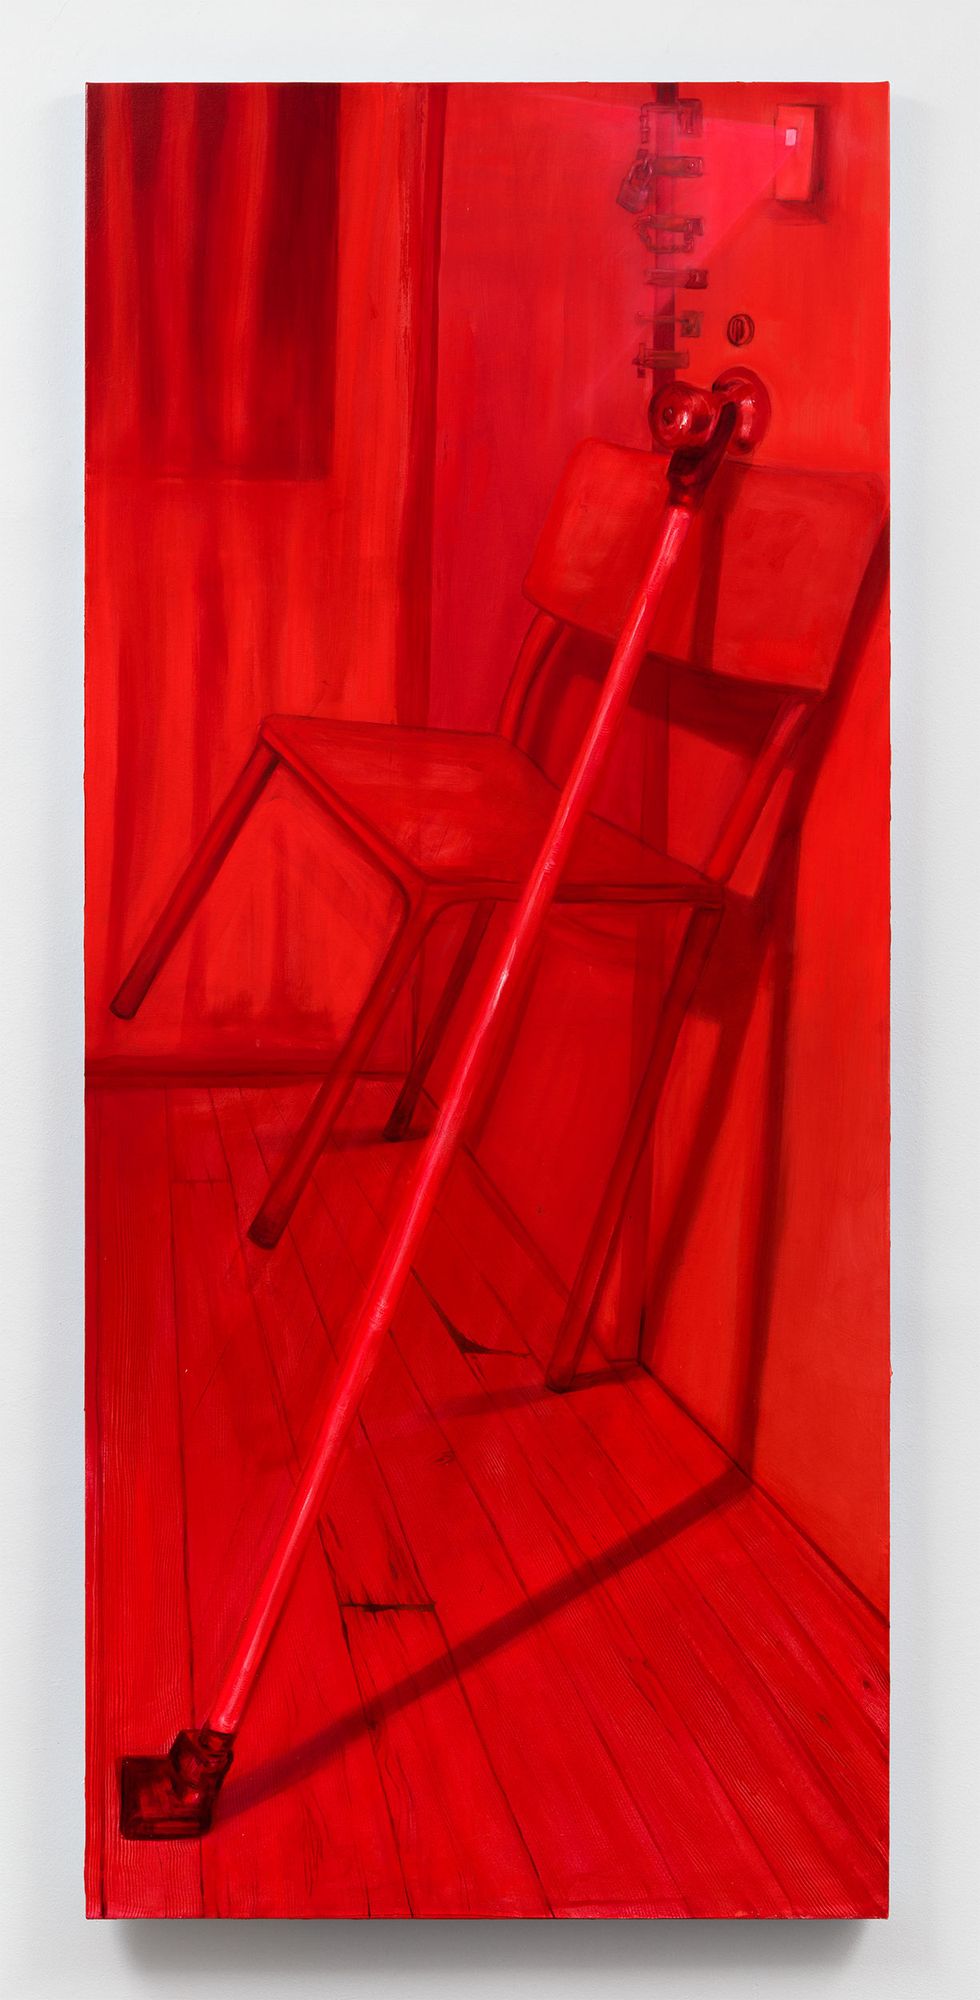 red painting of a chair leaning up against door and light shining through the peep hole